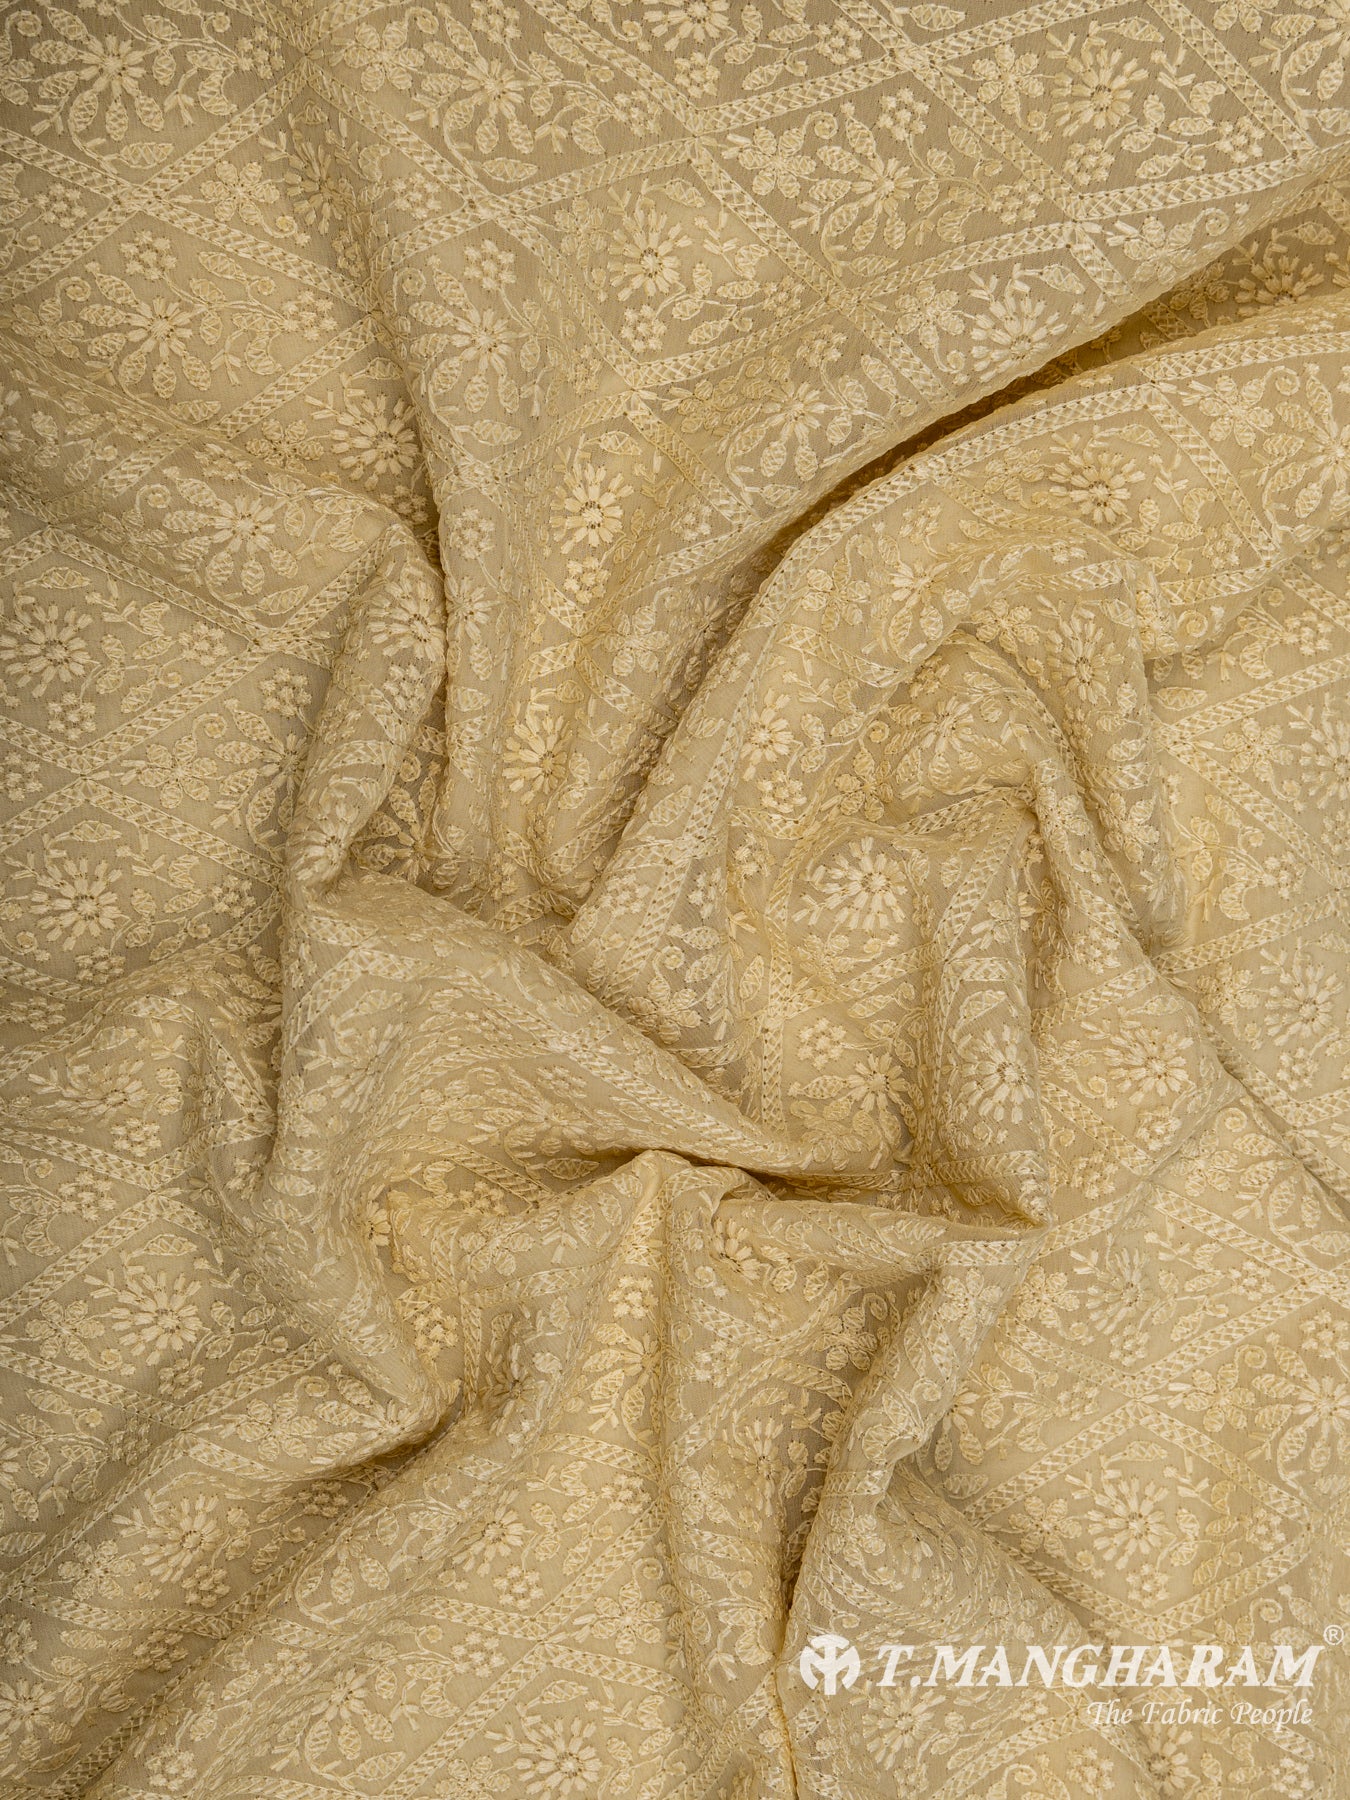 Yellow Georgette Embroidery Fabric - EC6536 view-4